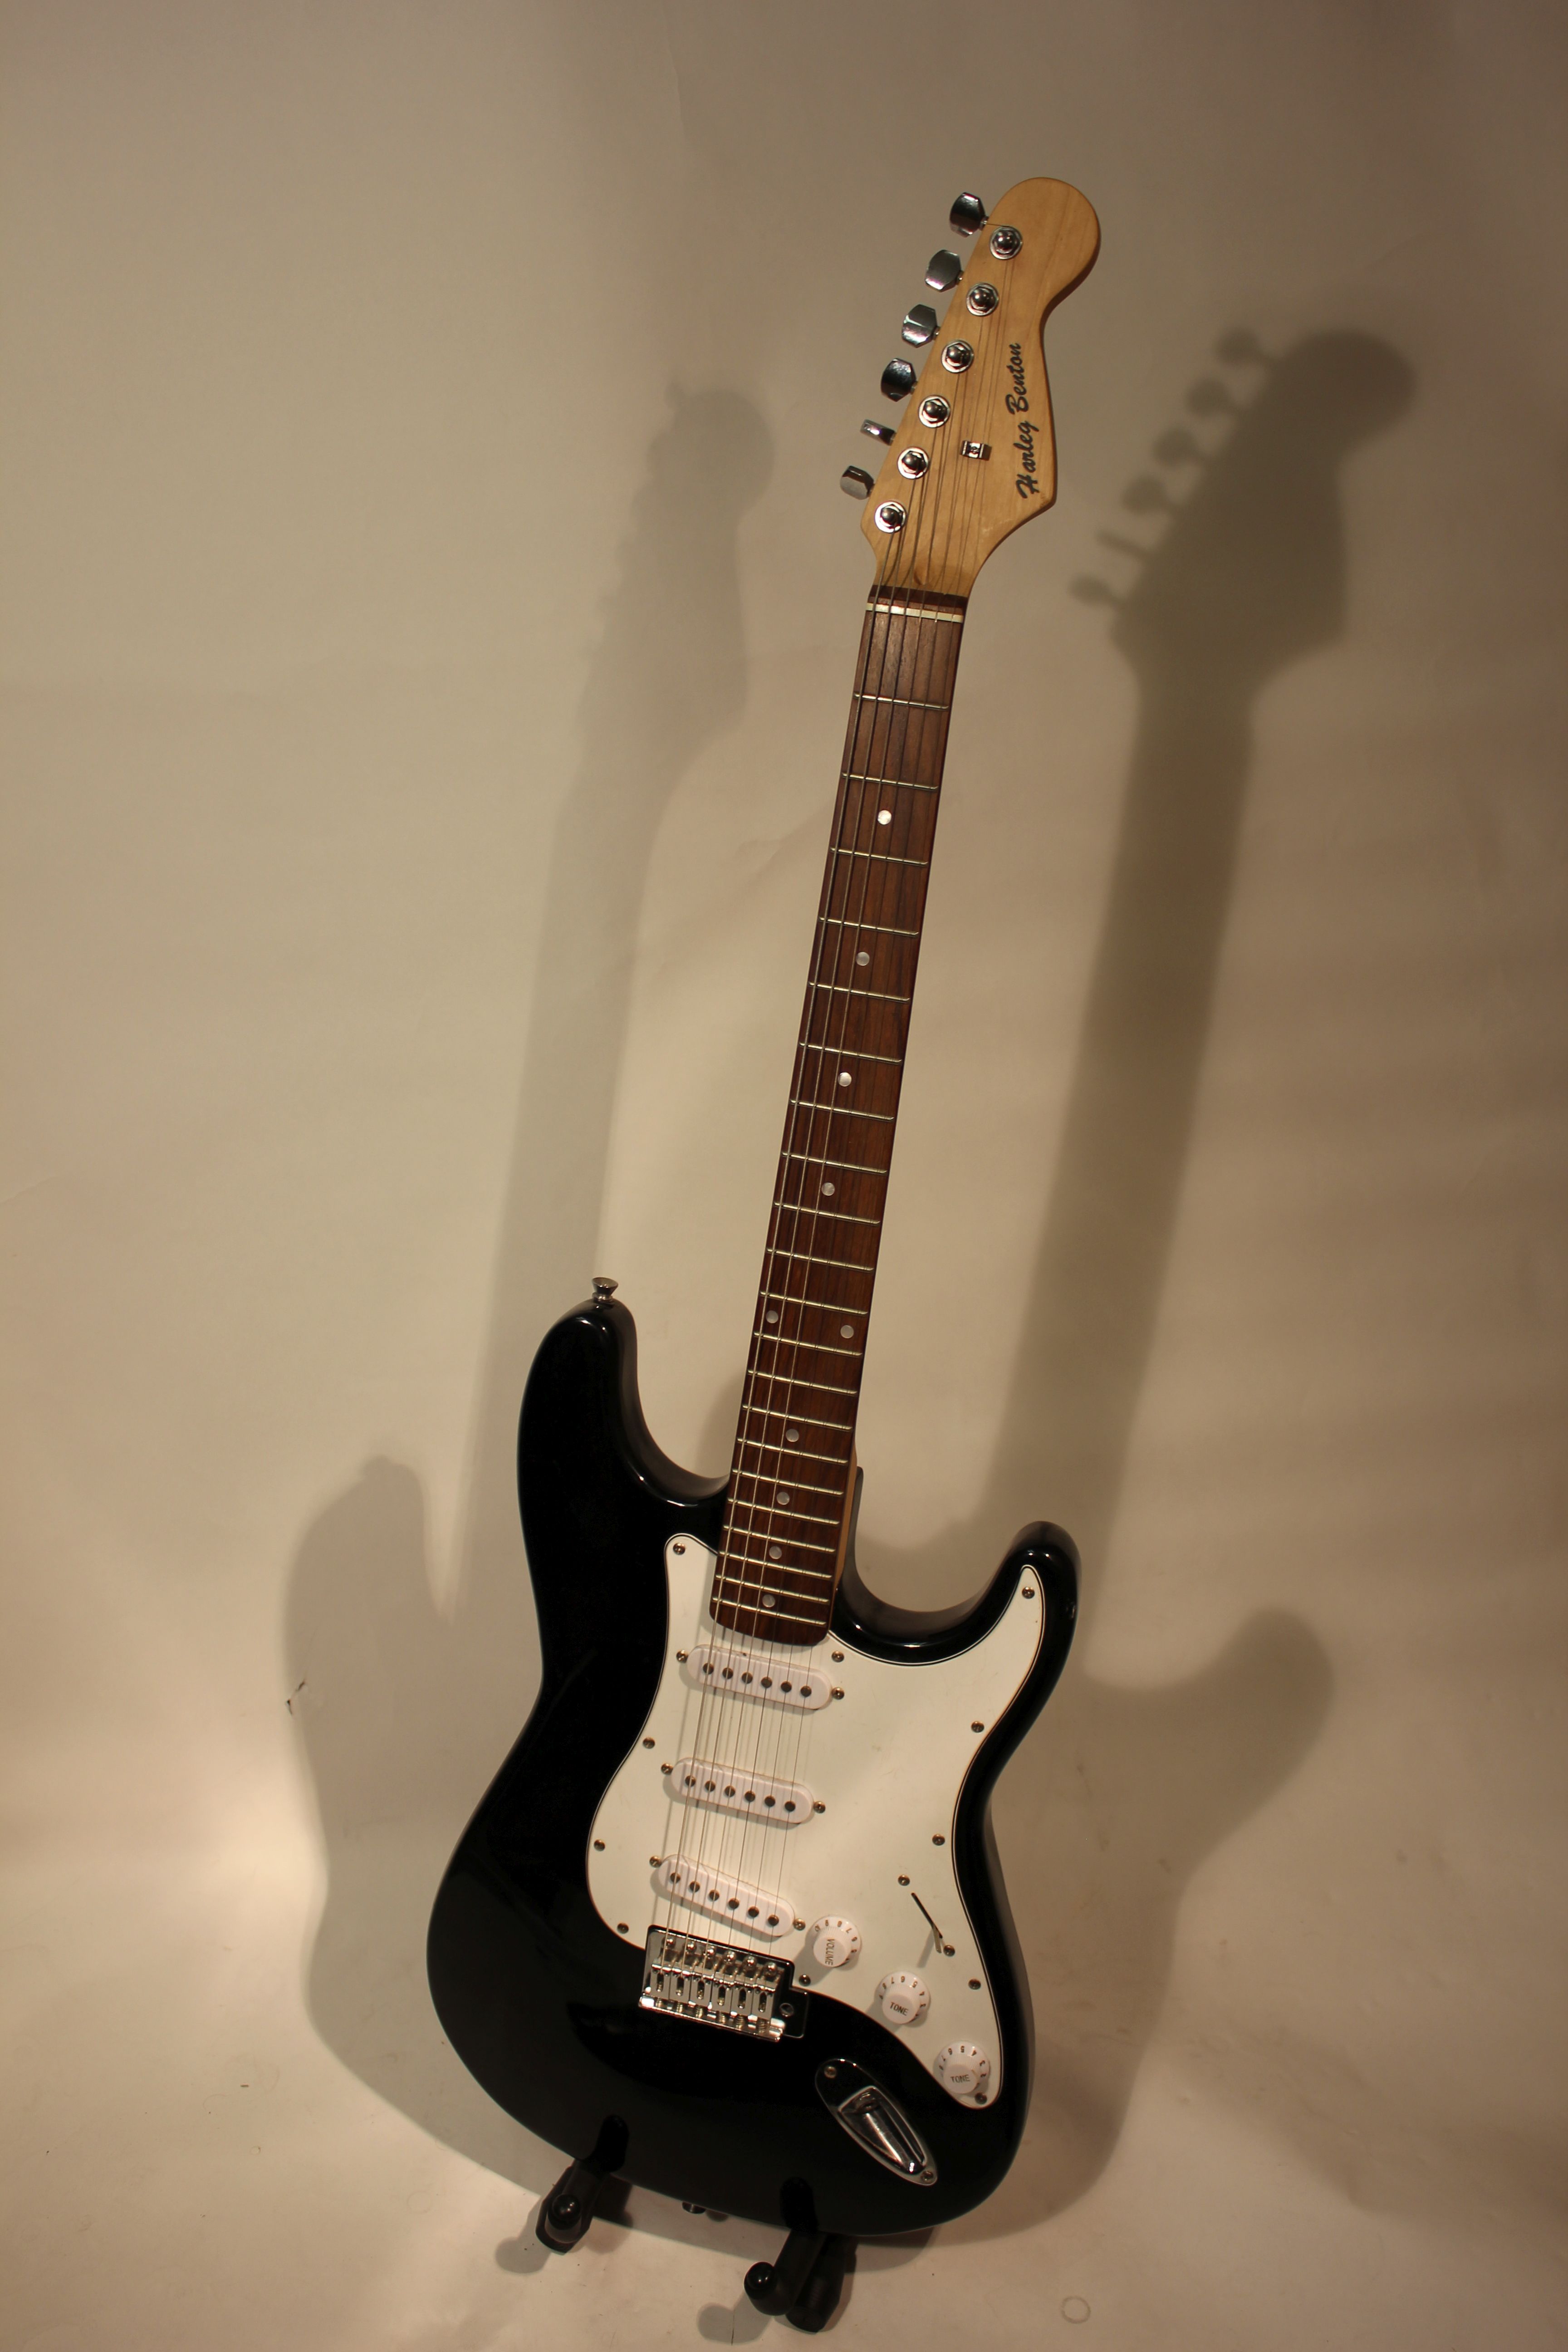 Guitar - Harley Benton Stratocaster style guitar, missing switch tip and back plate.